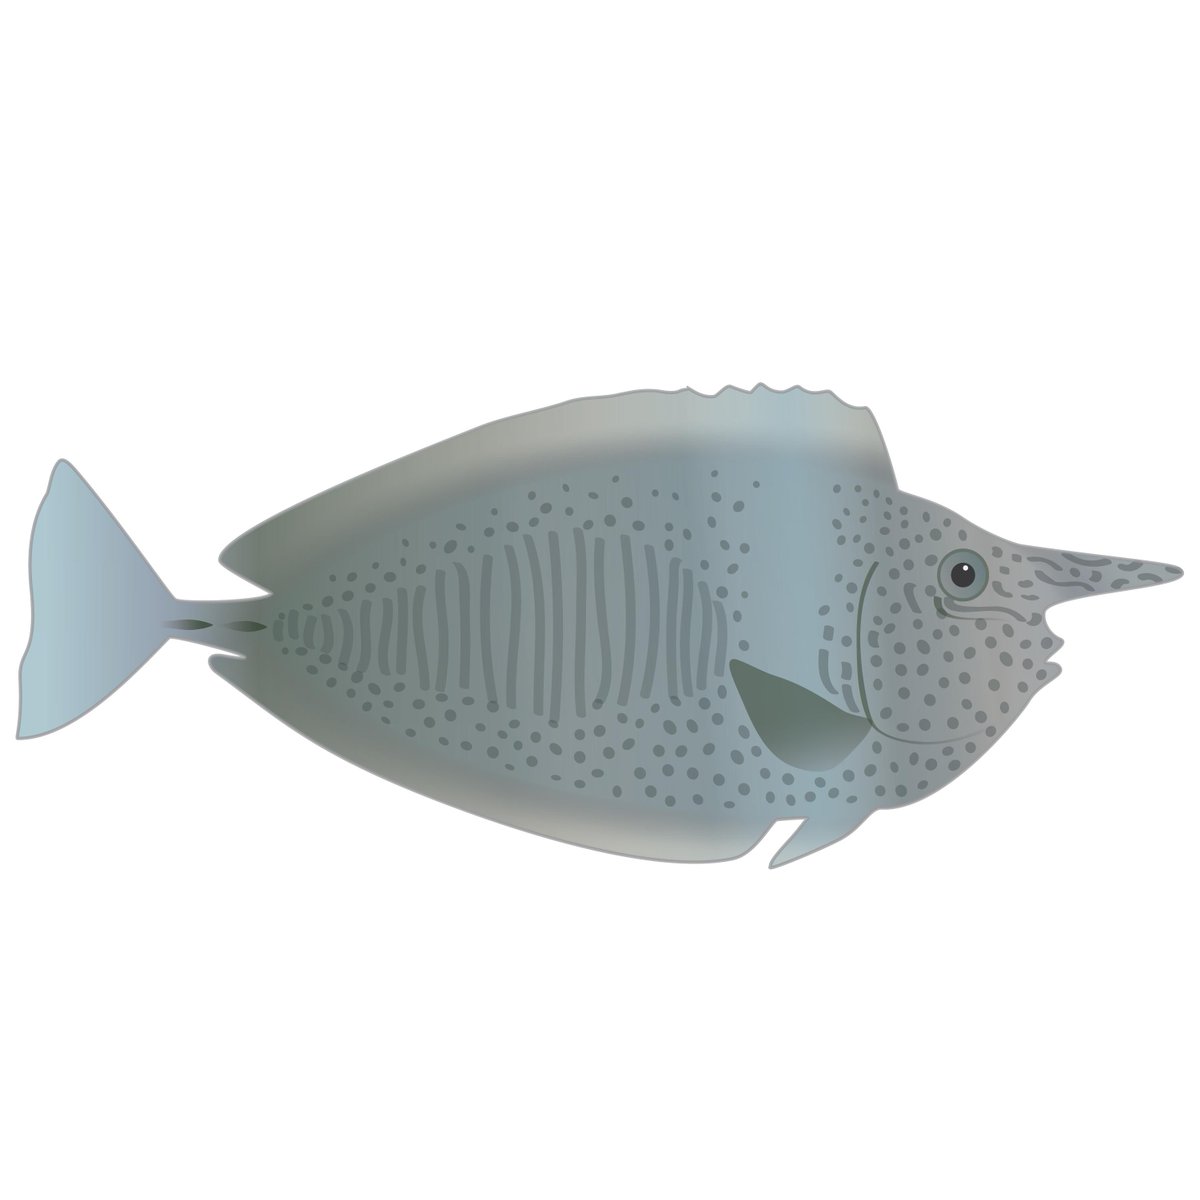 Aloha Friday! Looking for a unicorn? Meet the unicorn tang or spotted unicornfish (Naso brevirostris), known as kala in Hawai‘i. They develop a 'horn' later in life, but it's purpose remains a mystery... What do you think it's for?
#FunFactFriday #FishFactFriday #sciart